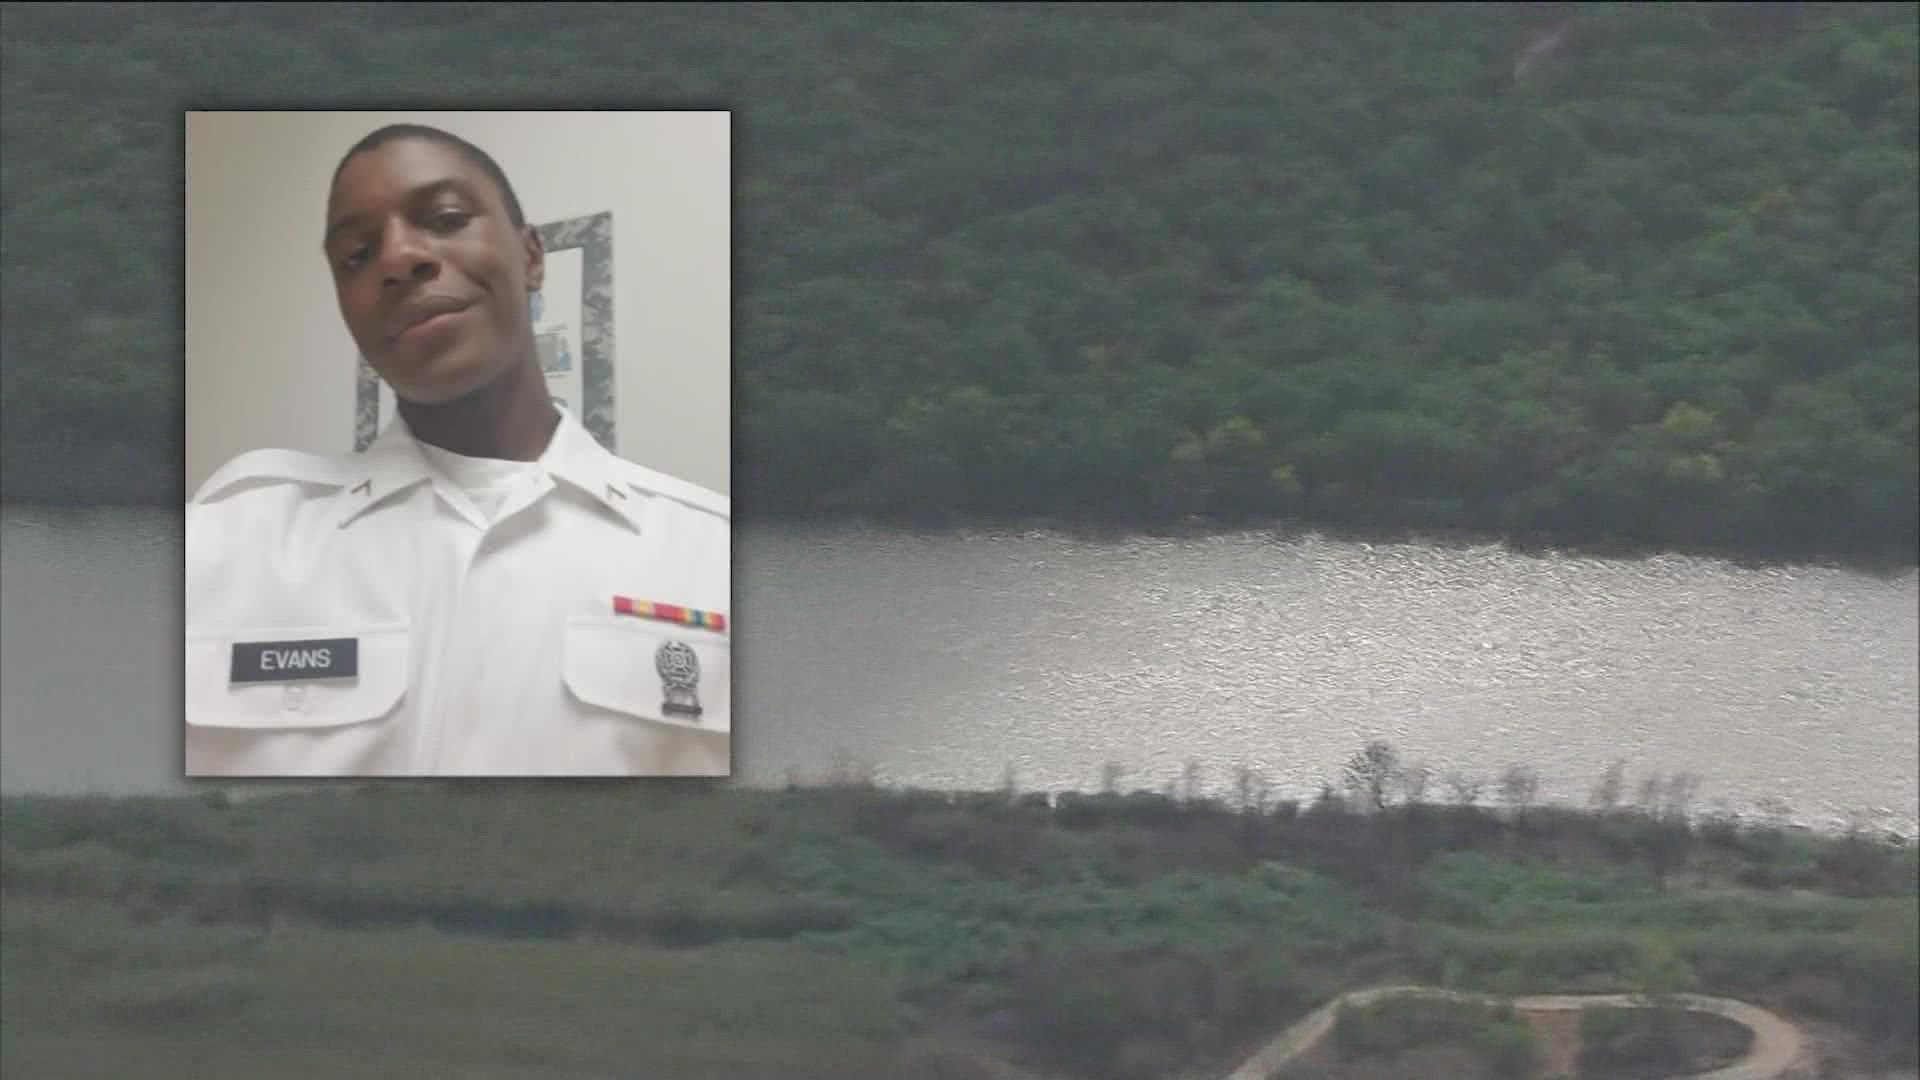 SPC Bishop E. Evans went missing Friday while trying to rescue two migrants who appeared to be drowning in the Rio Grande.